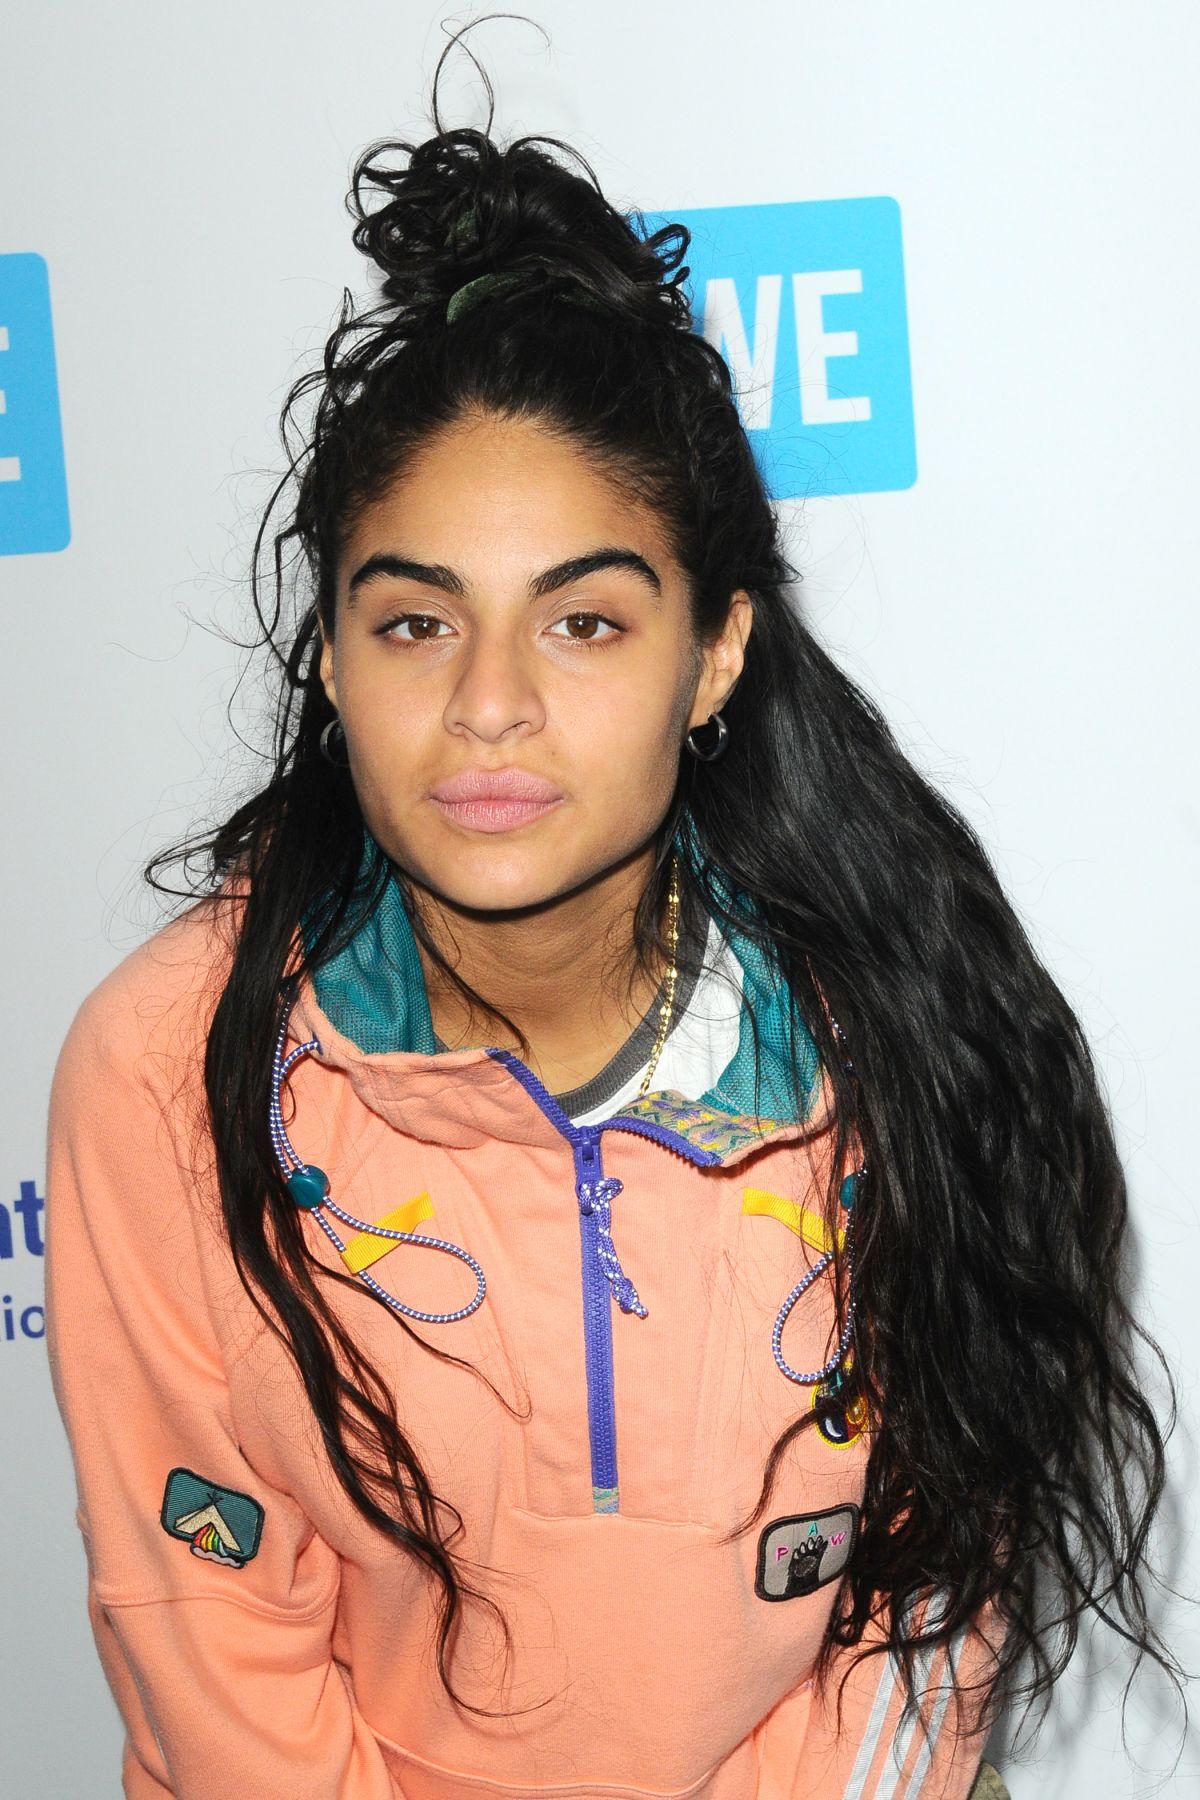 51 Hot Pictures Of Jessie Reyez Will Leave You Flabbergasted By Her Hot Magnificence 7